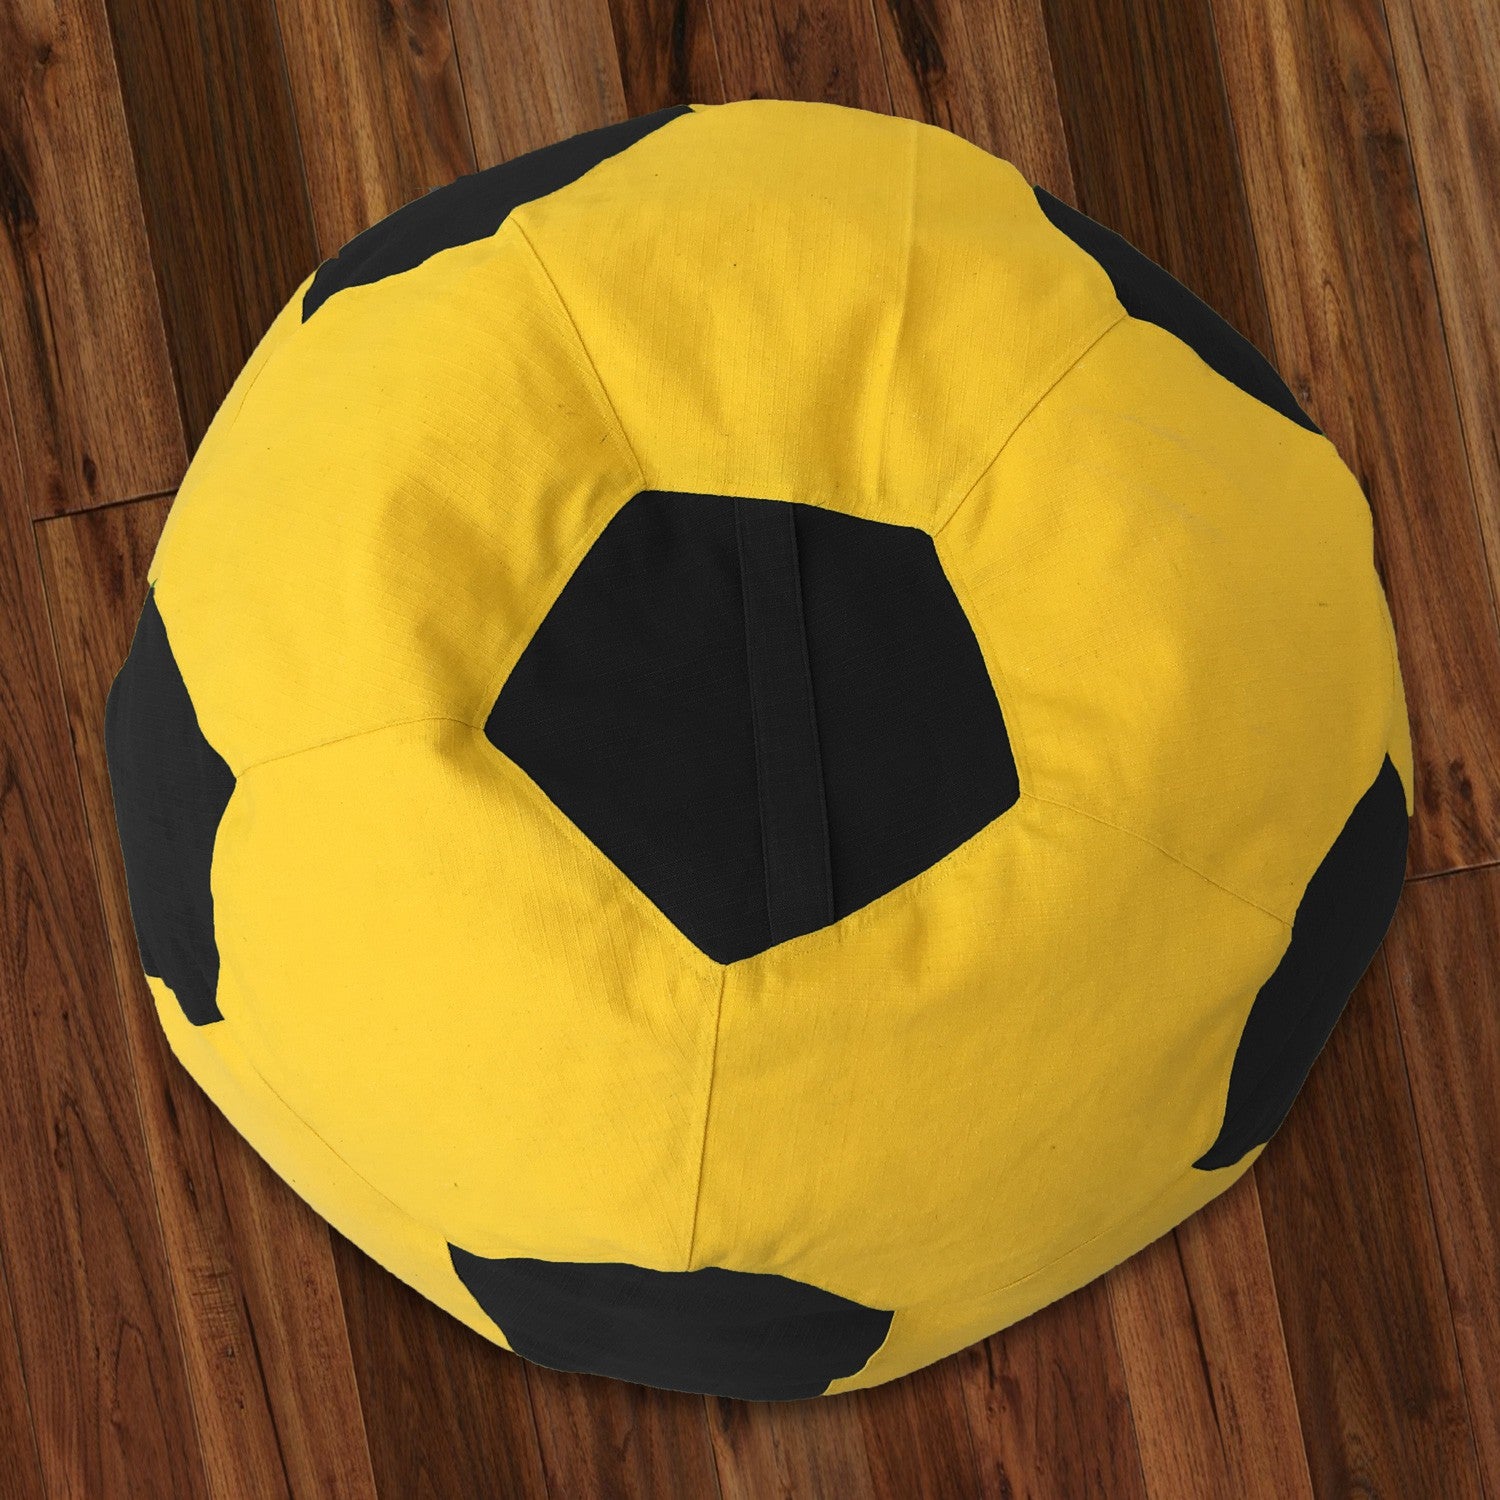 Bumblebee cotton handloom Football bean bag Cover (without beans)